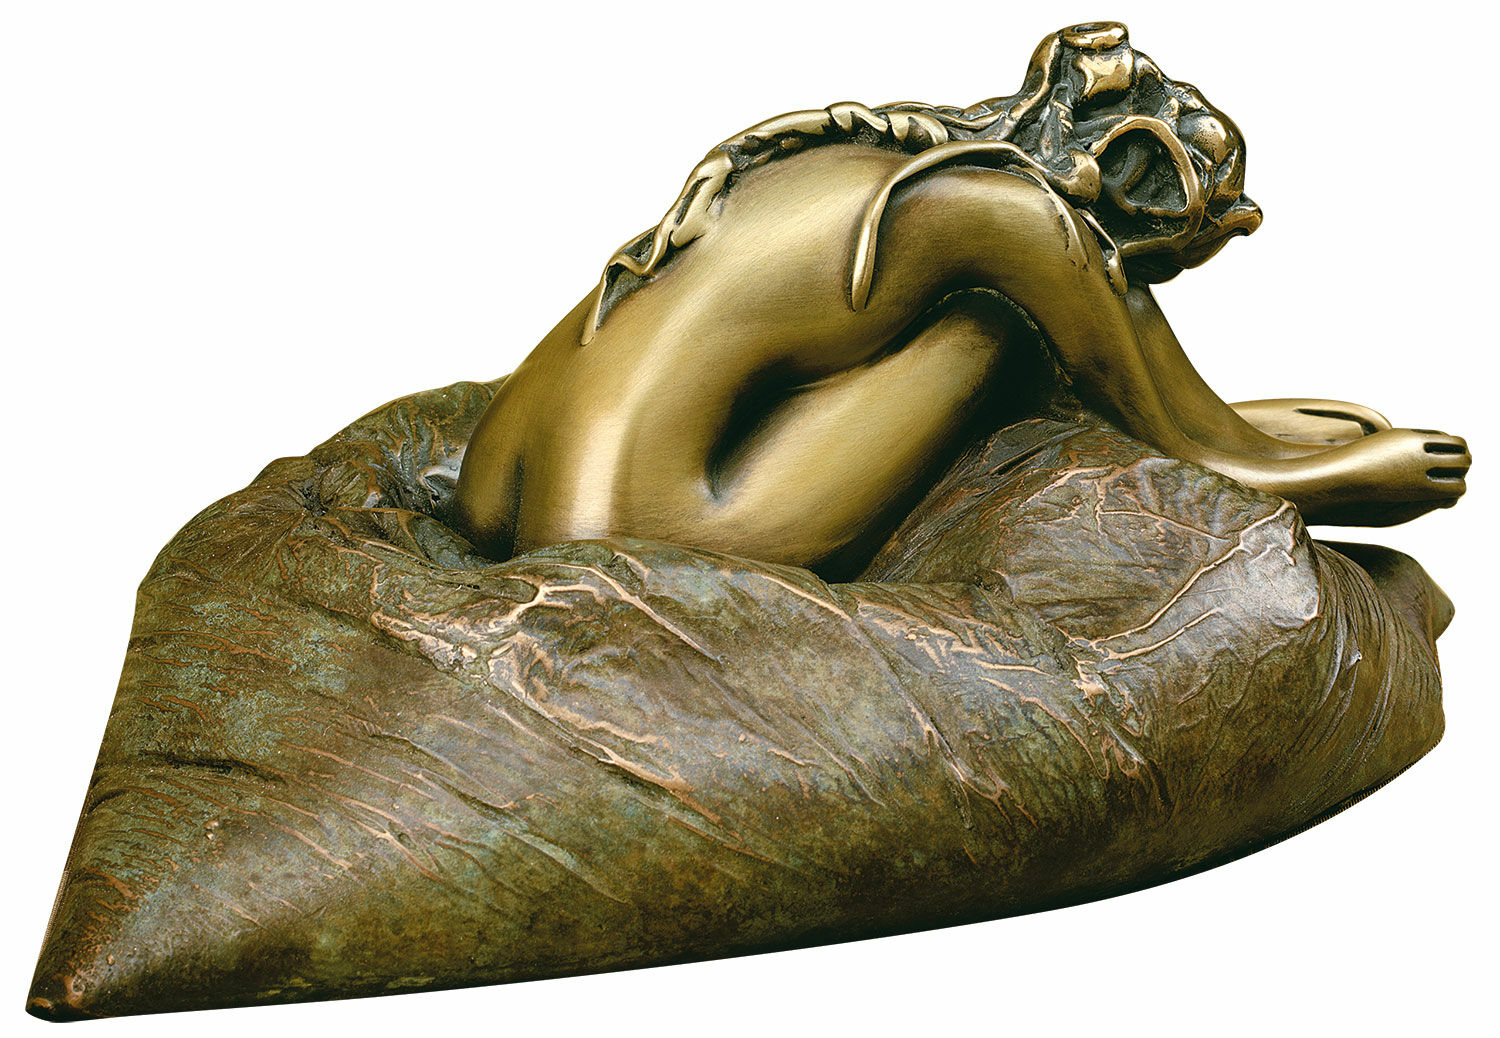 Sculpture "On the Cushion", bronze by Bruno Bruni